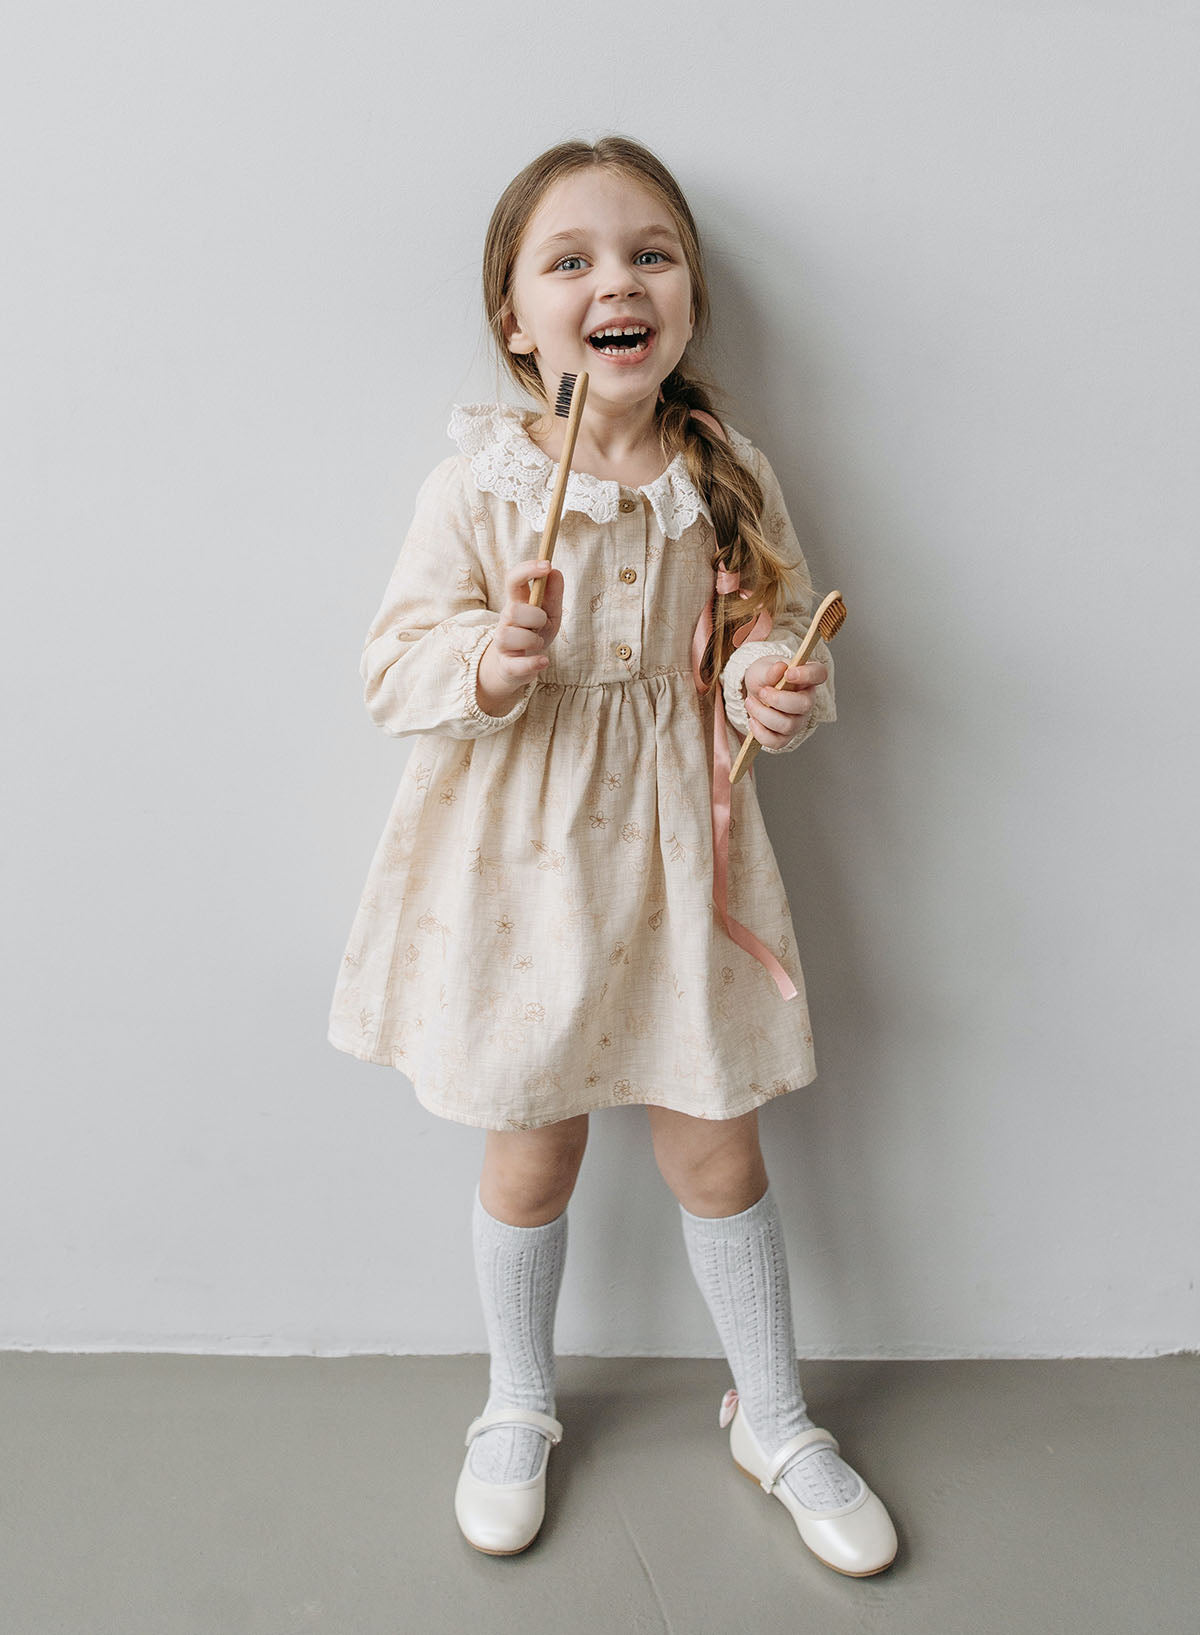 Smiling child holding toothbrushes